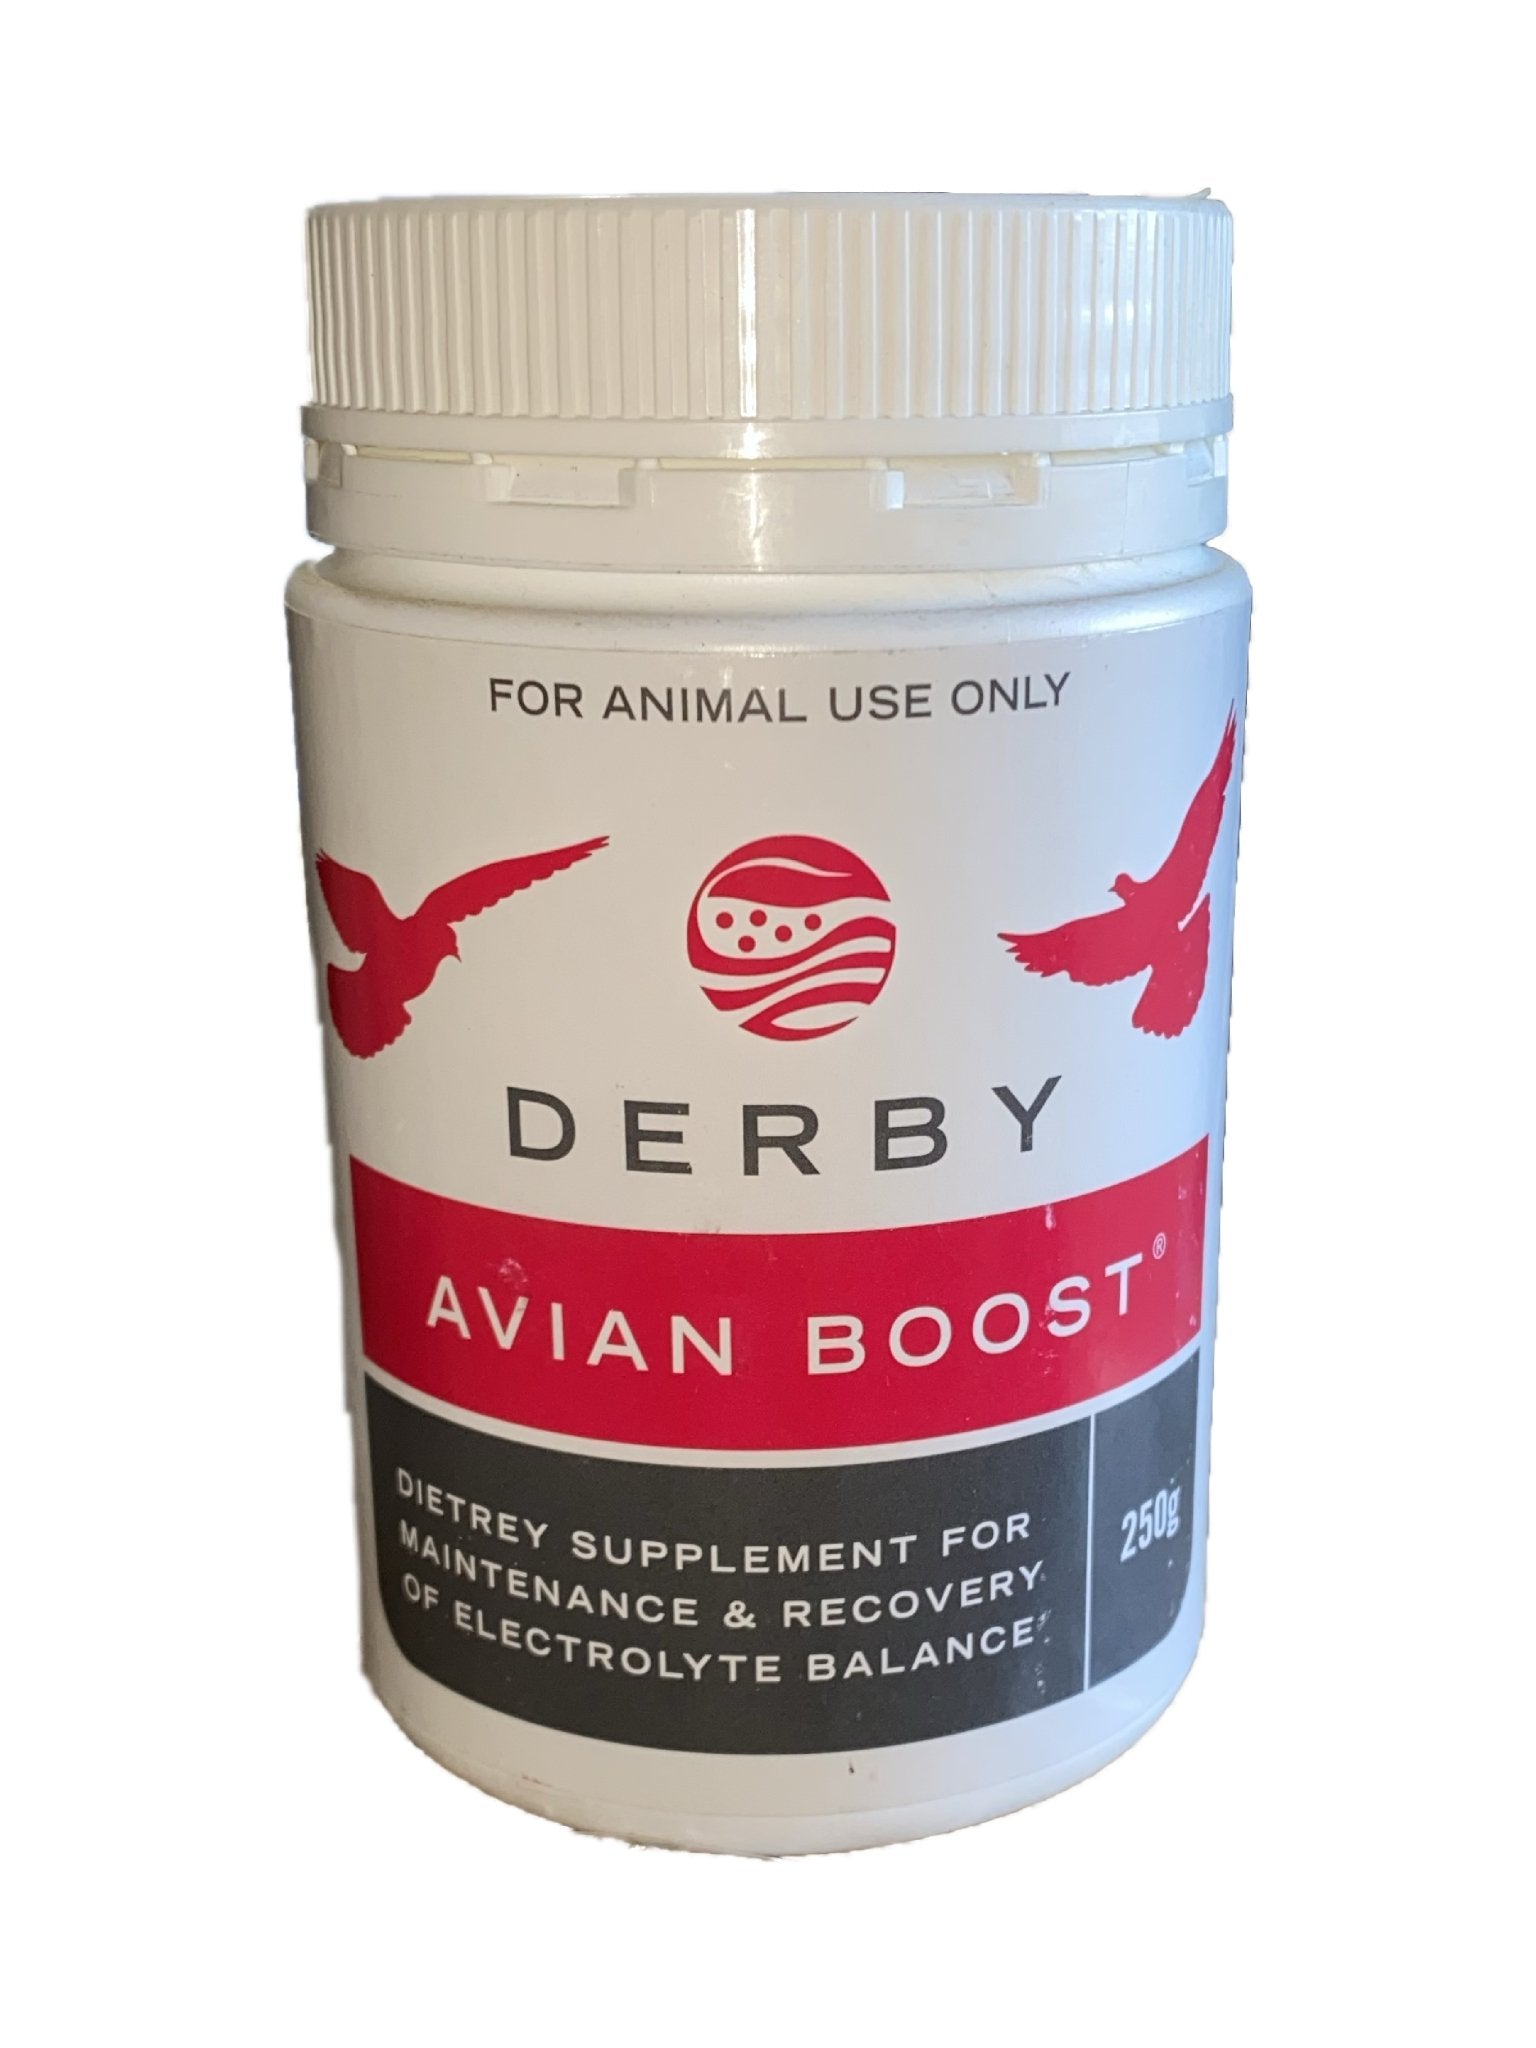 Mineral Energy Derby Avian Boost - Woonona Petfood & Produce